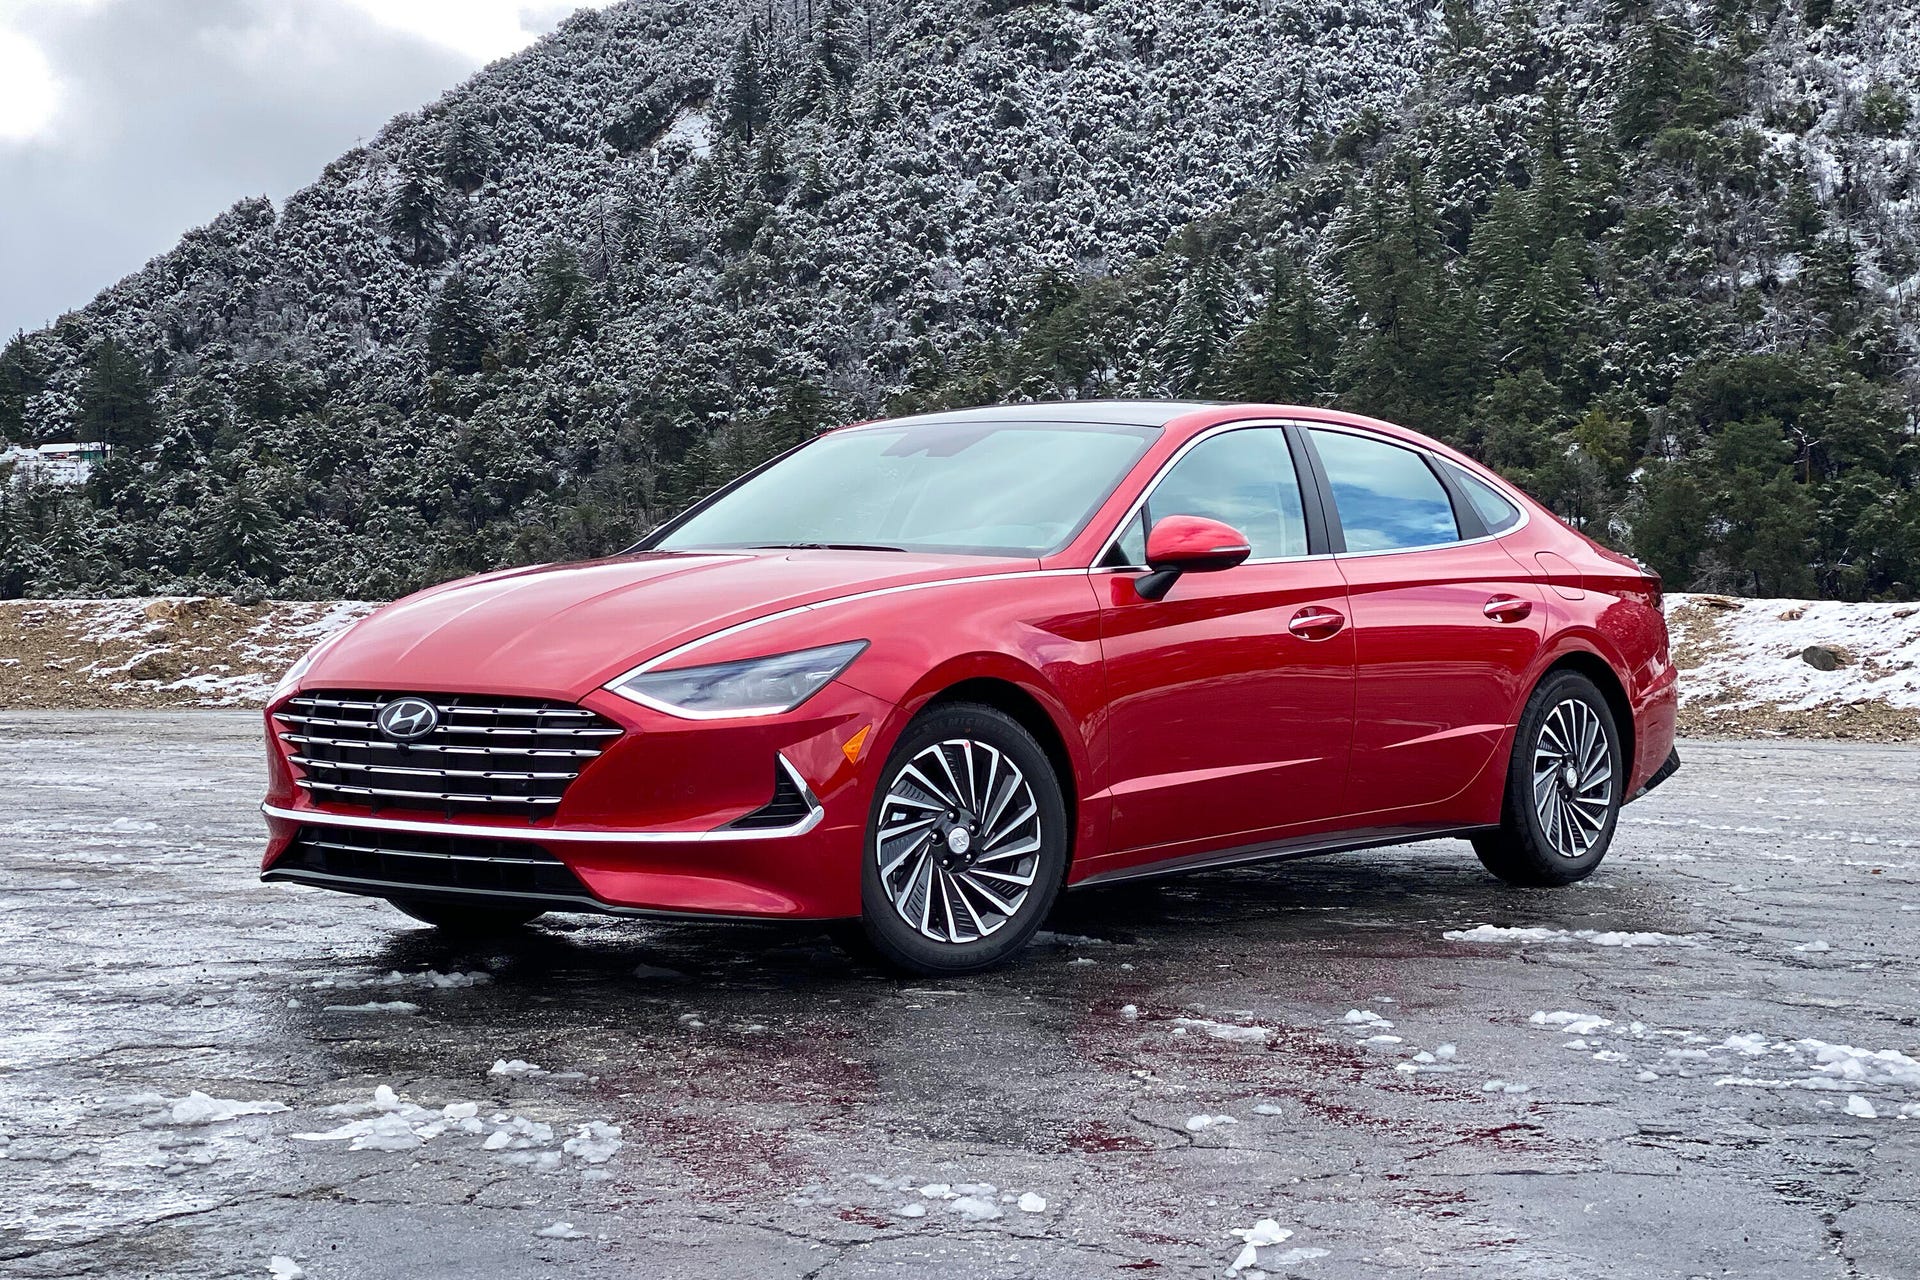 2020 Hyundai Sonata Hybrid first drive review: Fuel-sippin' in style - CNET